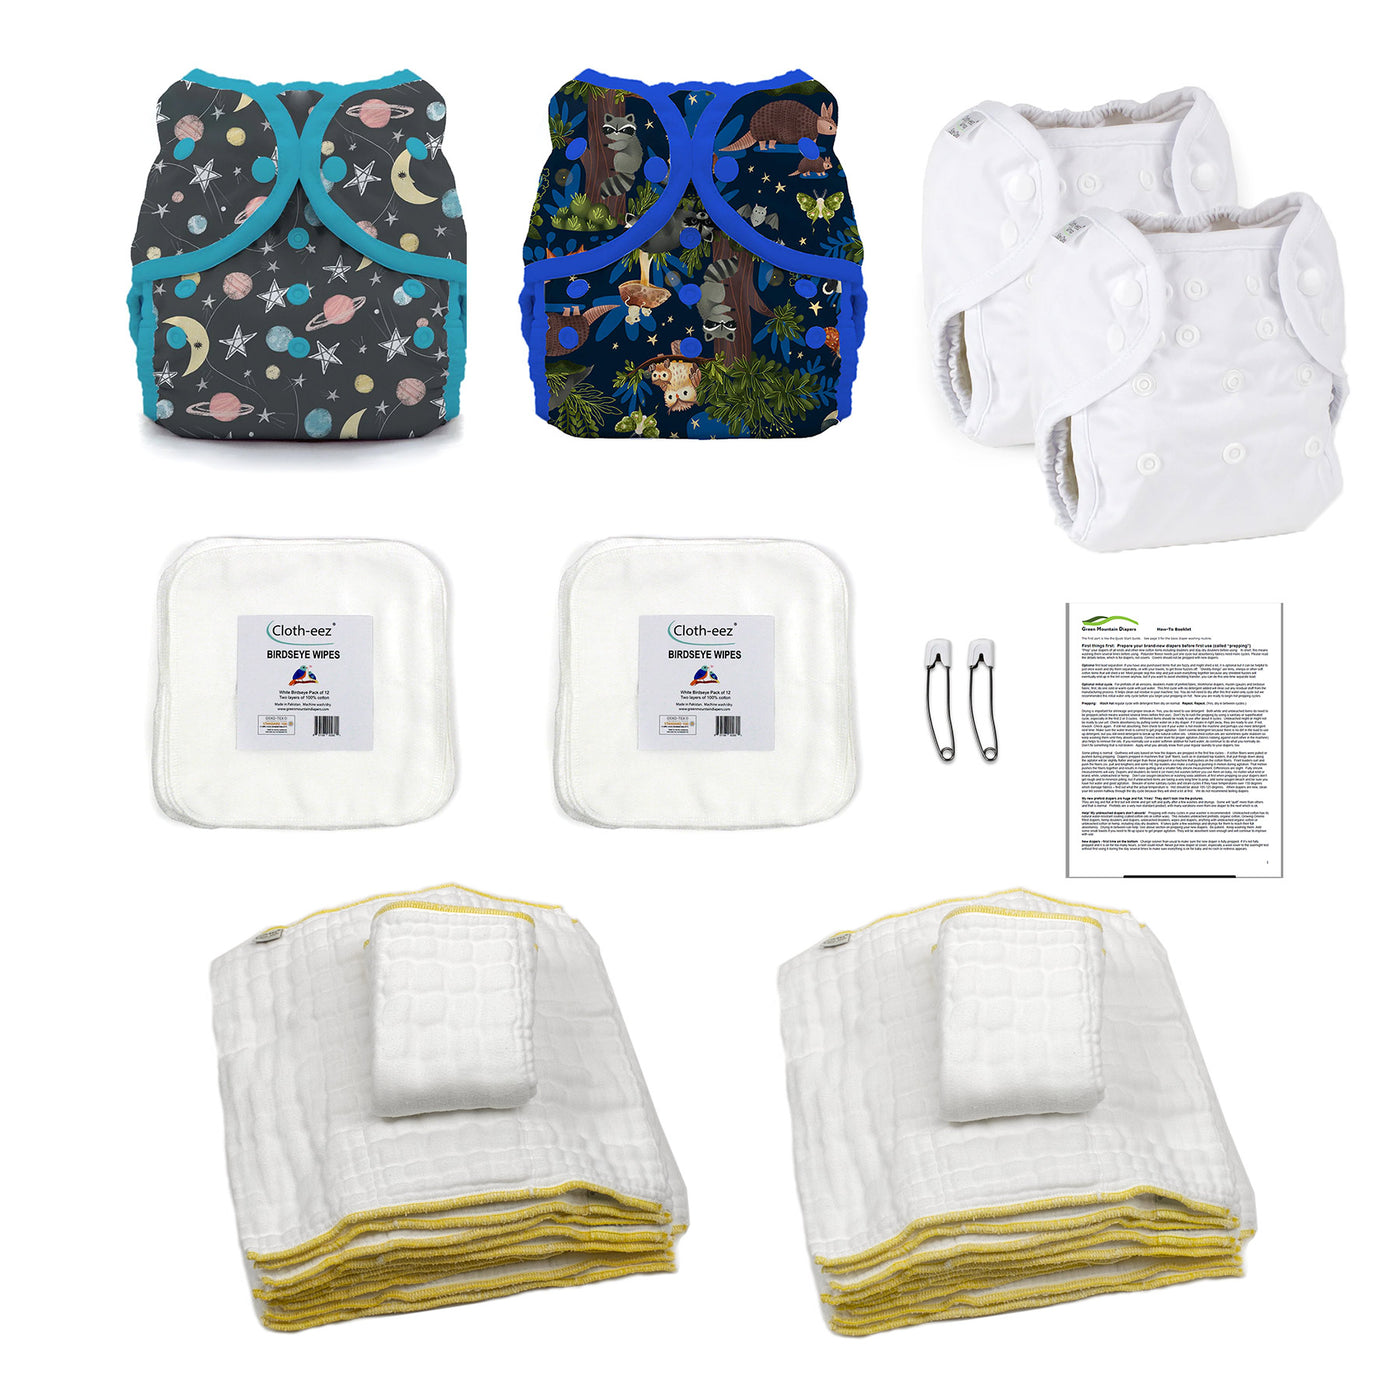 Kit of cloth diapers for a newborn boy